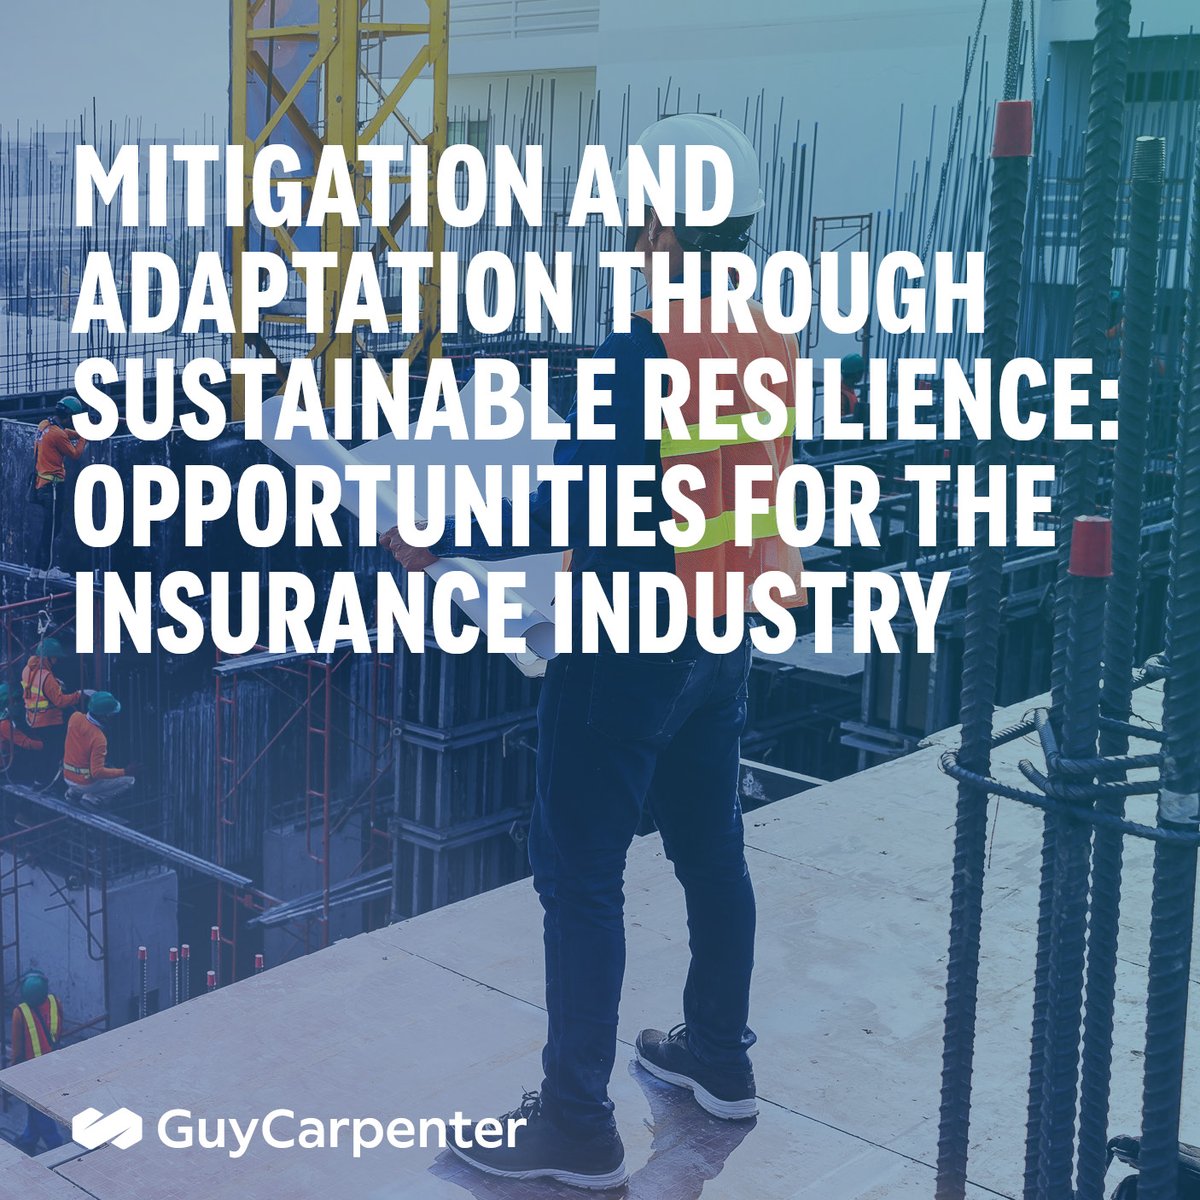 Guy Carpenter colleagues recently attended a @IBHS_org workshop where they explored sustainable resilience in modern building practices and how the insurance industry can be a key player in embracing emerging building technologies and solutions. bit.ly/3QHQsdi